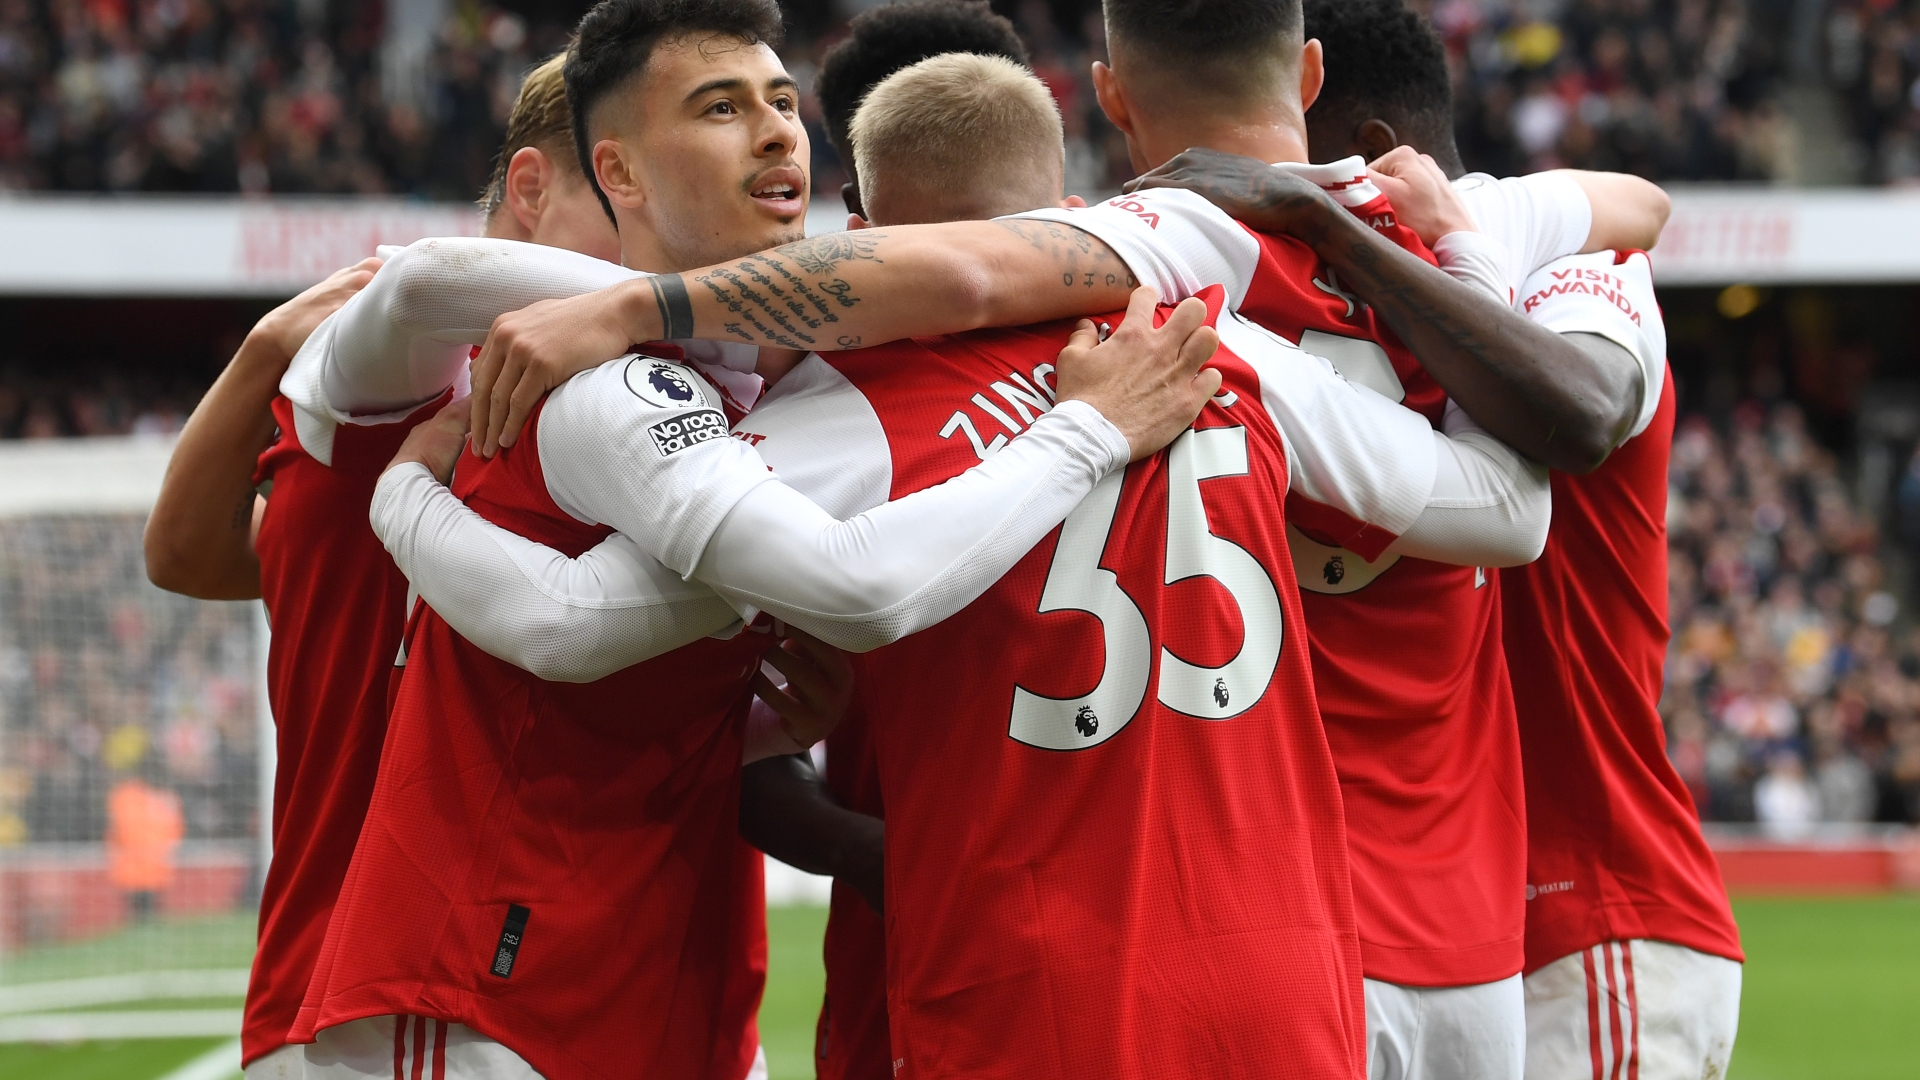 Arsenal are already equalling their tallies for last season and London derby record shows Mikel Arteta's men are breaking new ground